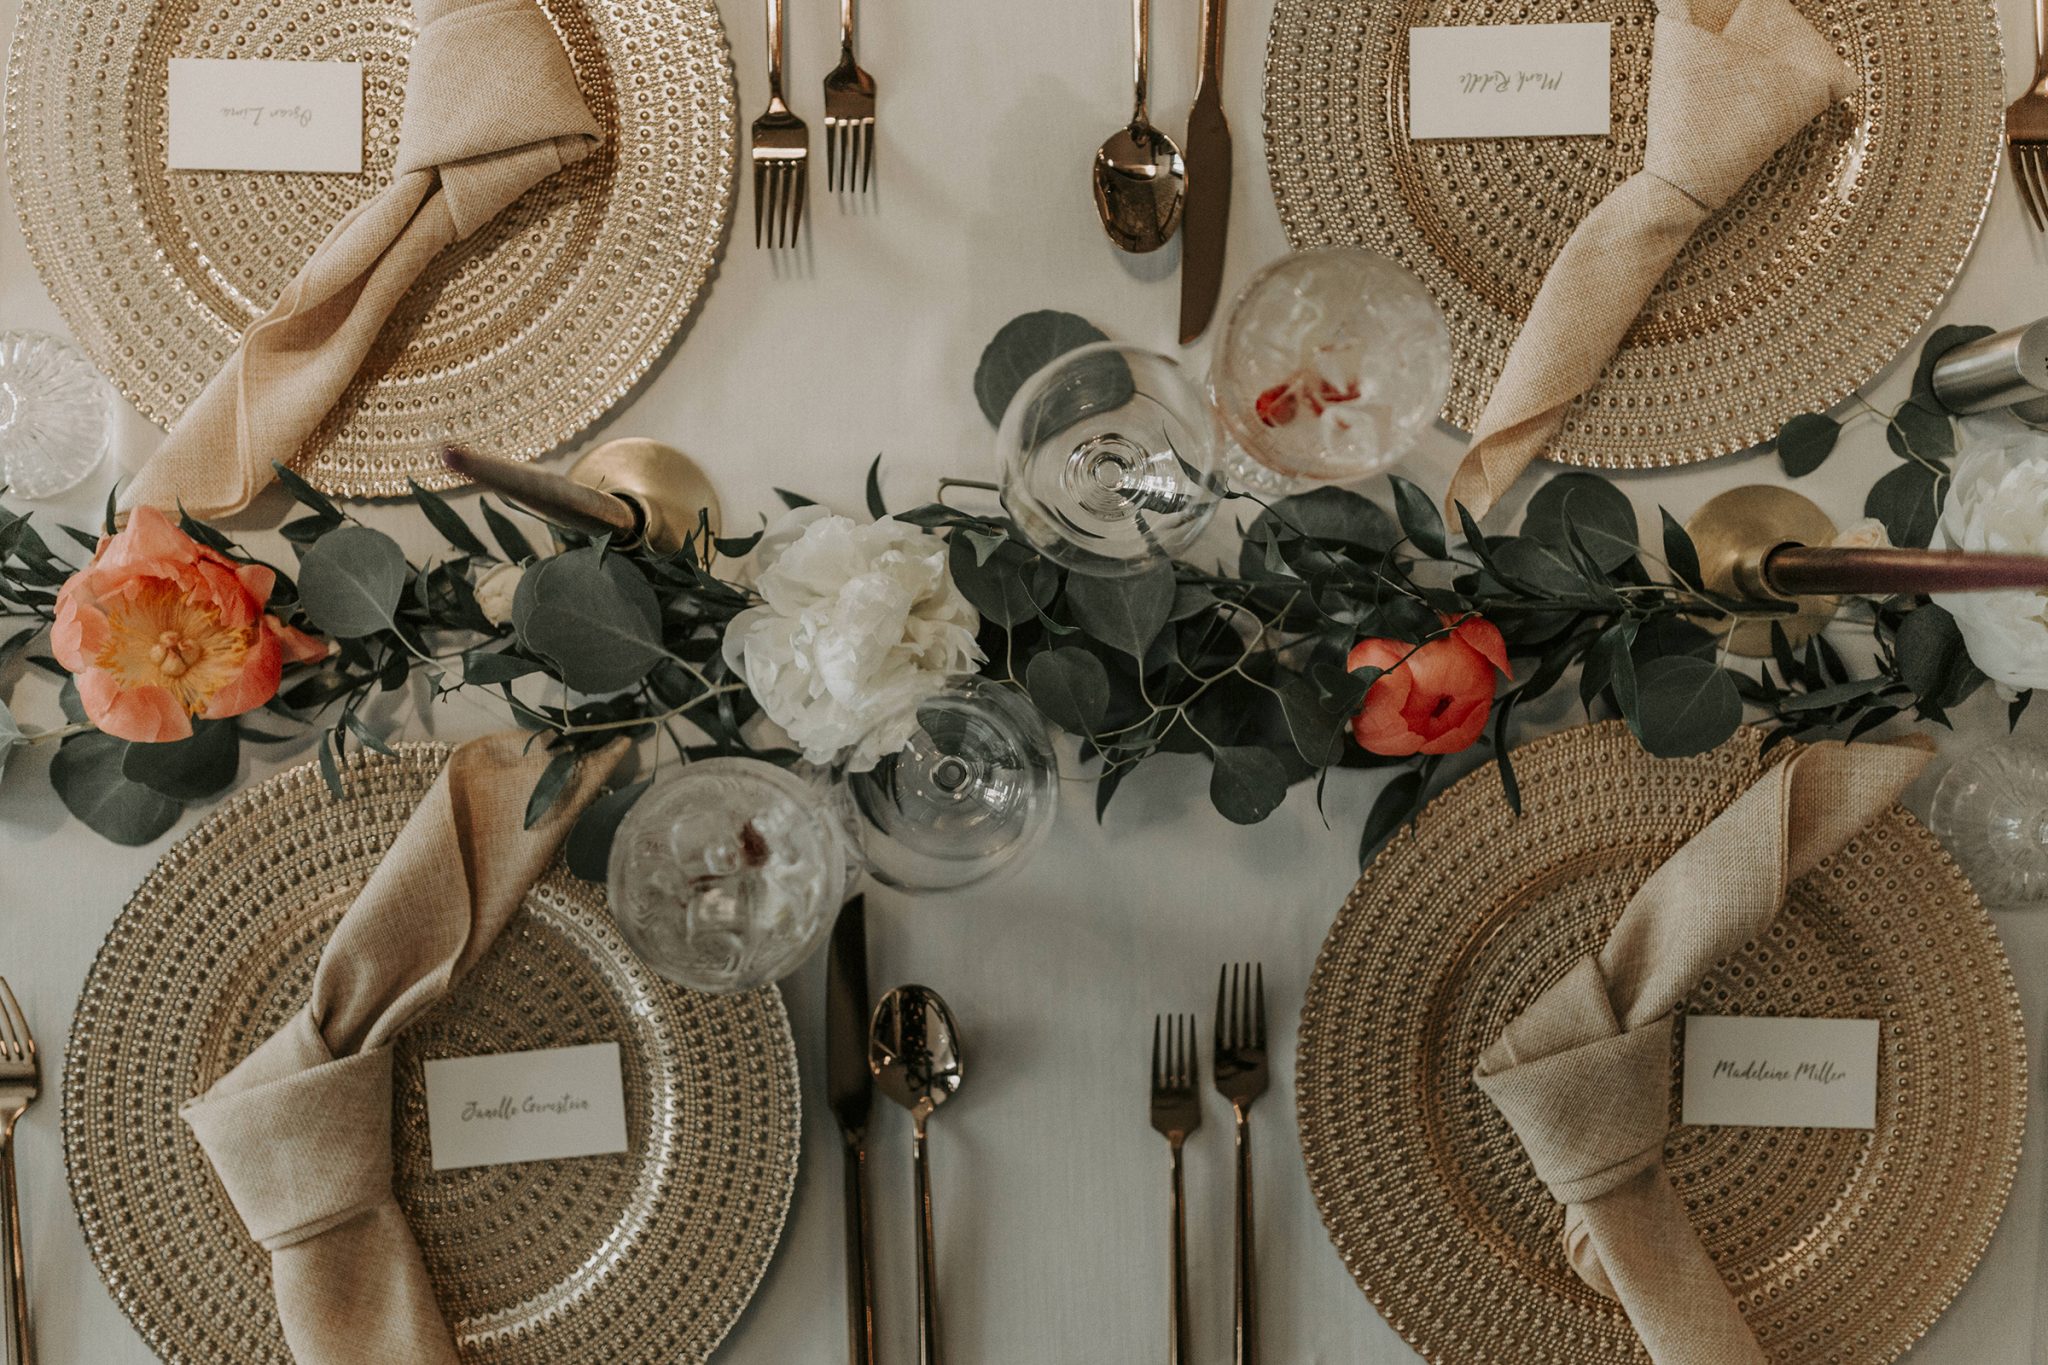 Wedding Tablescape Inspiration - local wedding advice and inspiration featured on Bronte Bride